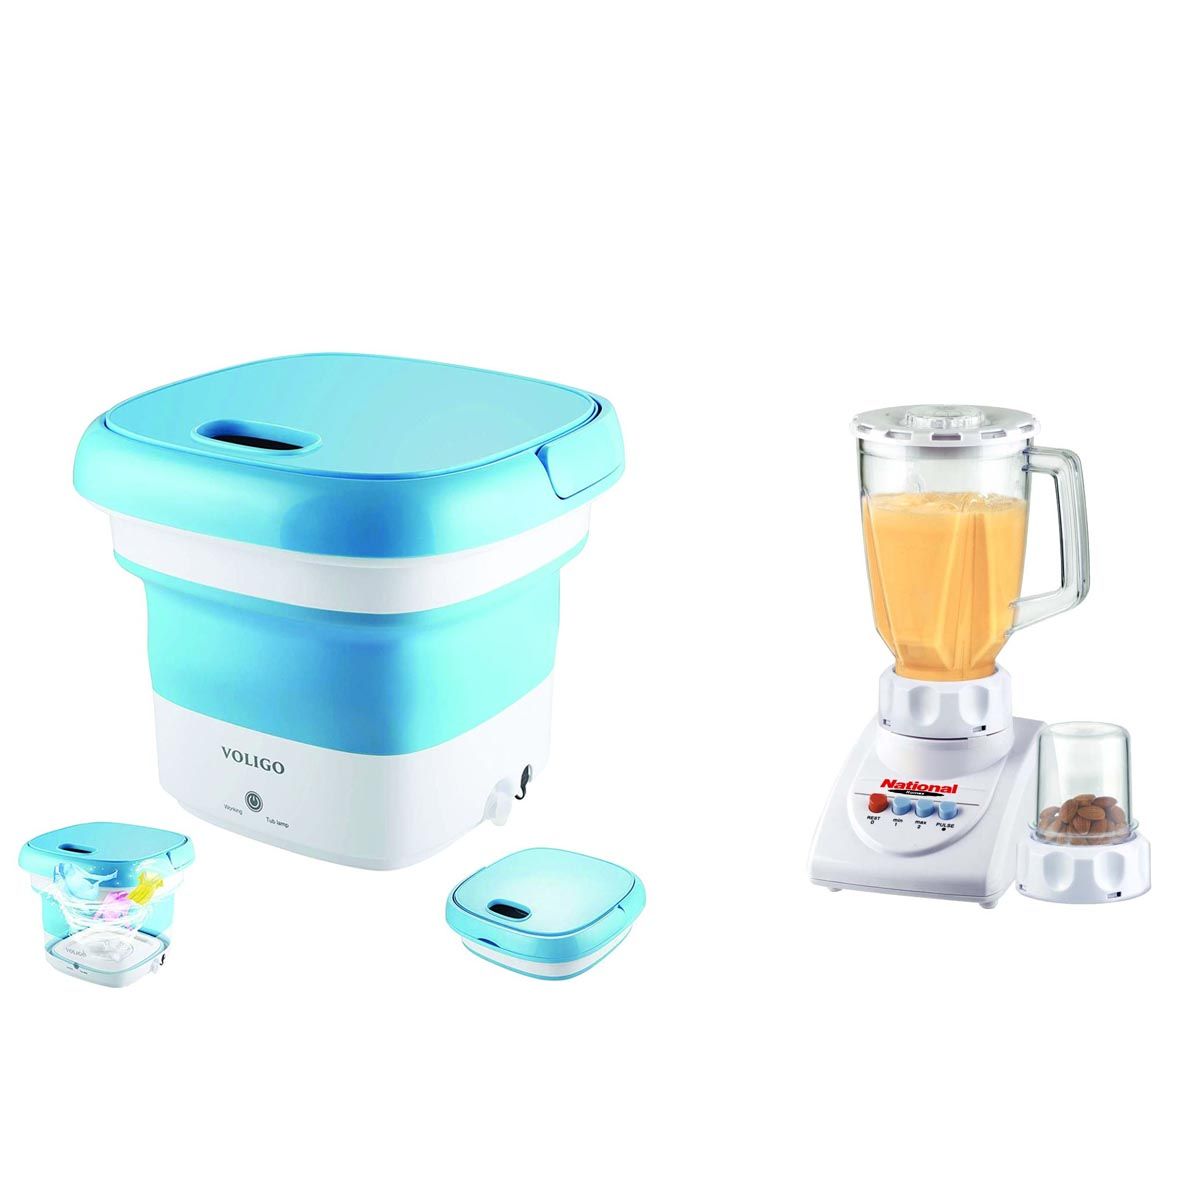 Mini Washing Machine Foldable Bucket Type - Laundry Clothes Washer + Oxford Blender 2 In 1